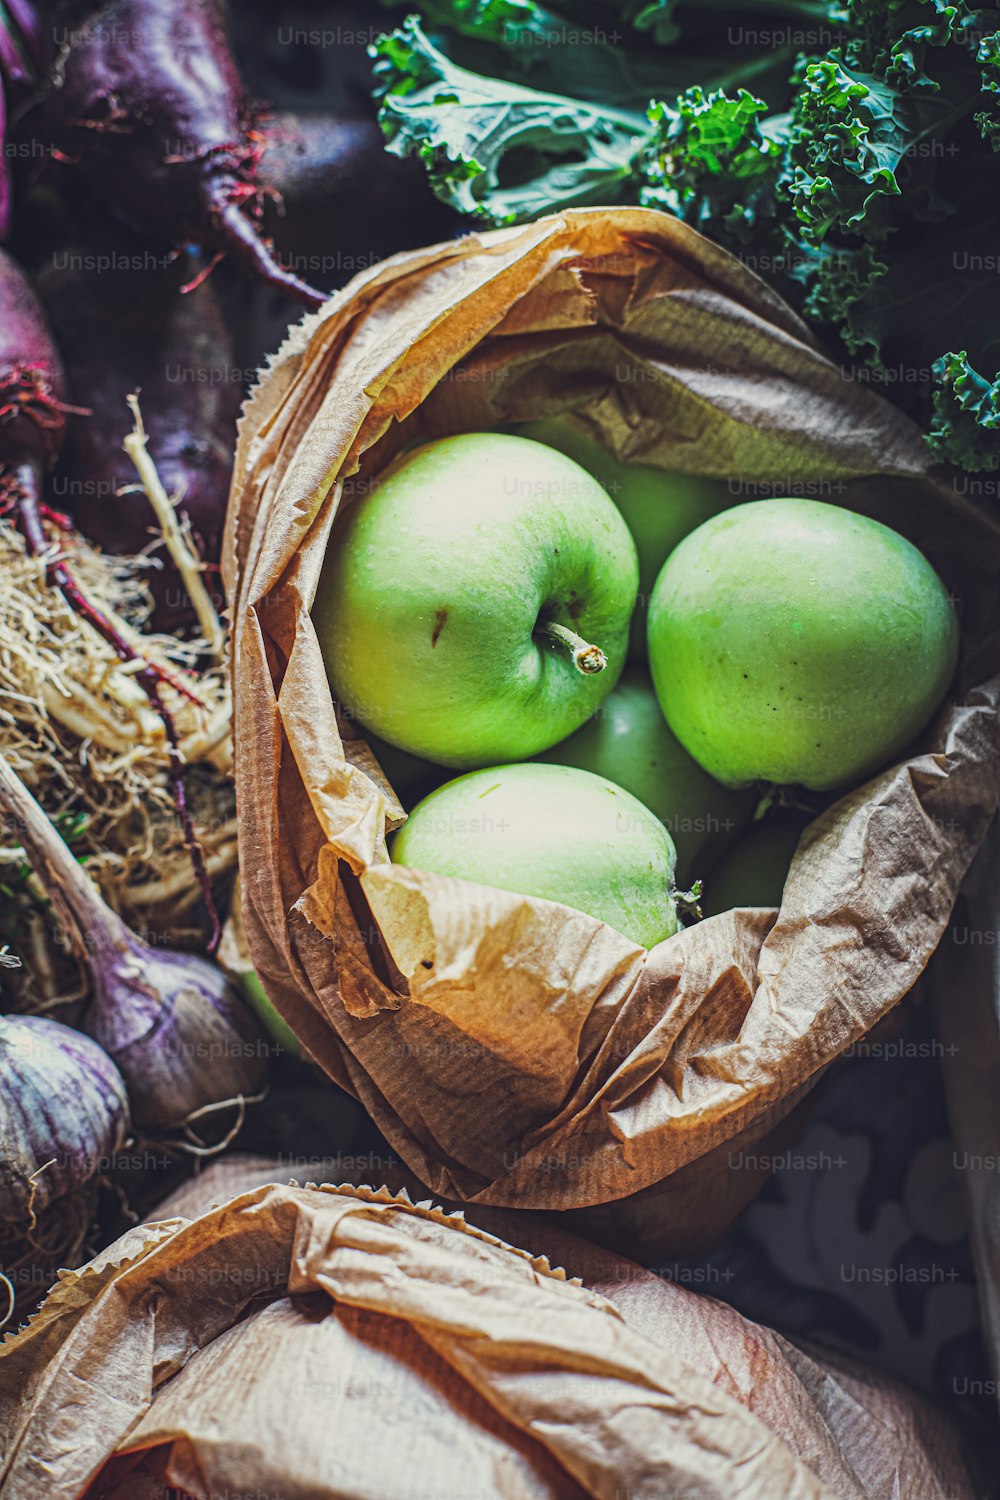 a bag full of green apples sitting on top of a pile of vegetables